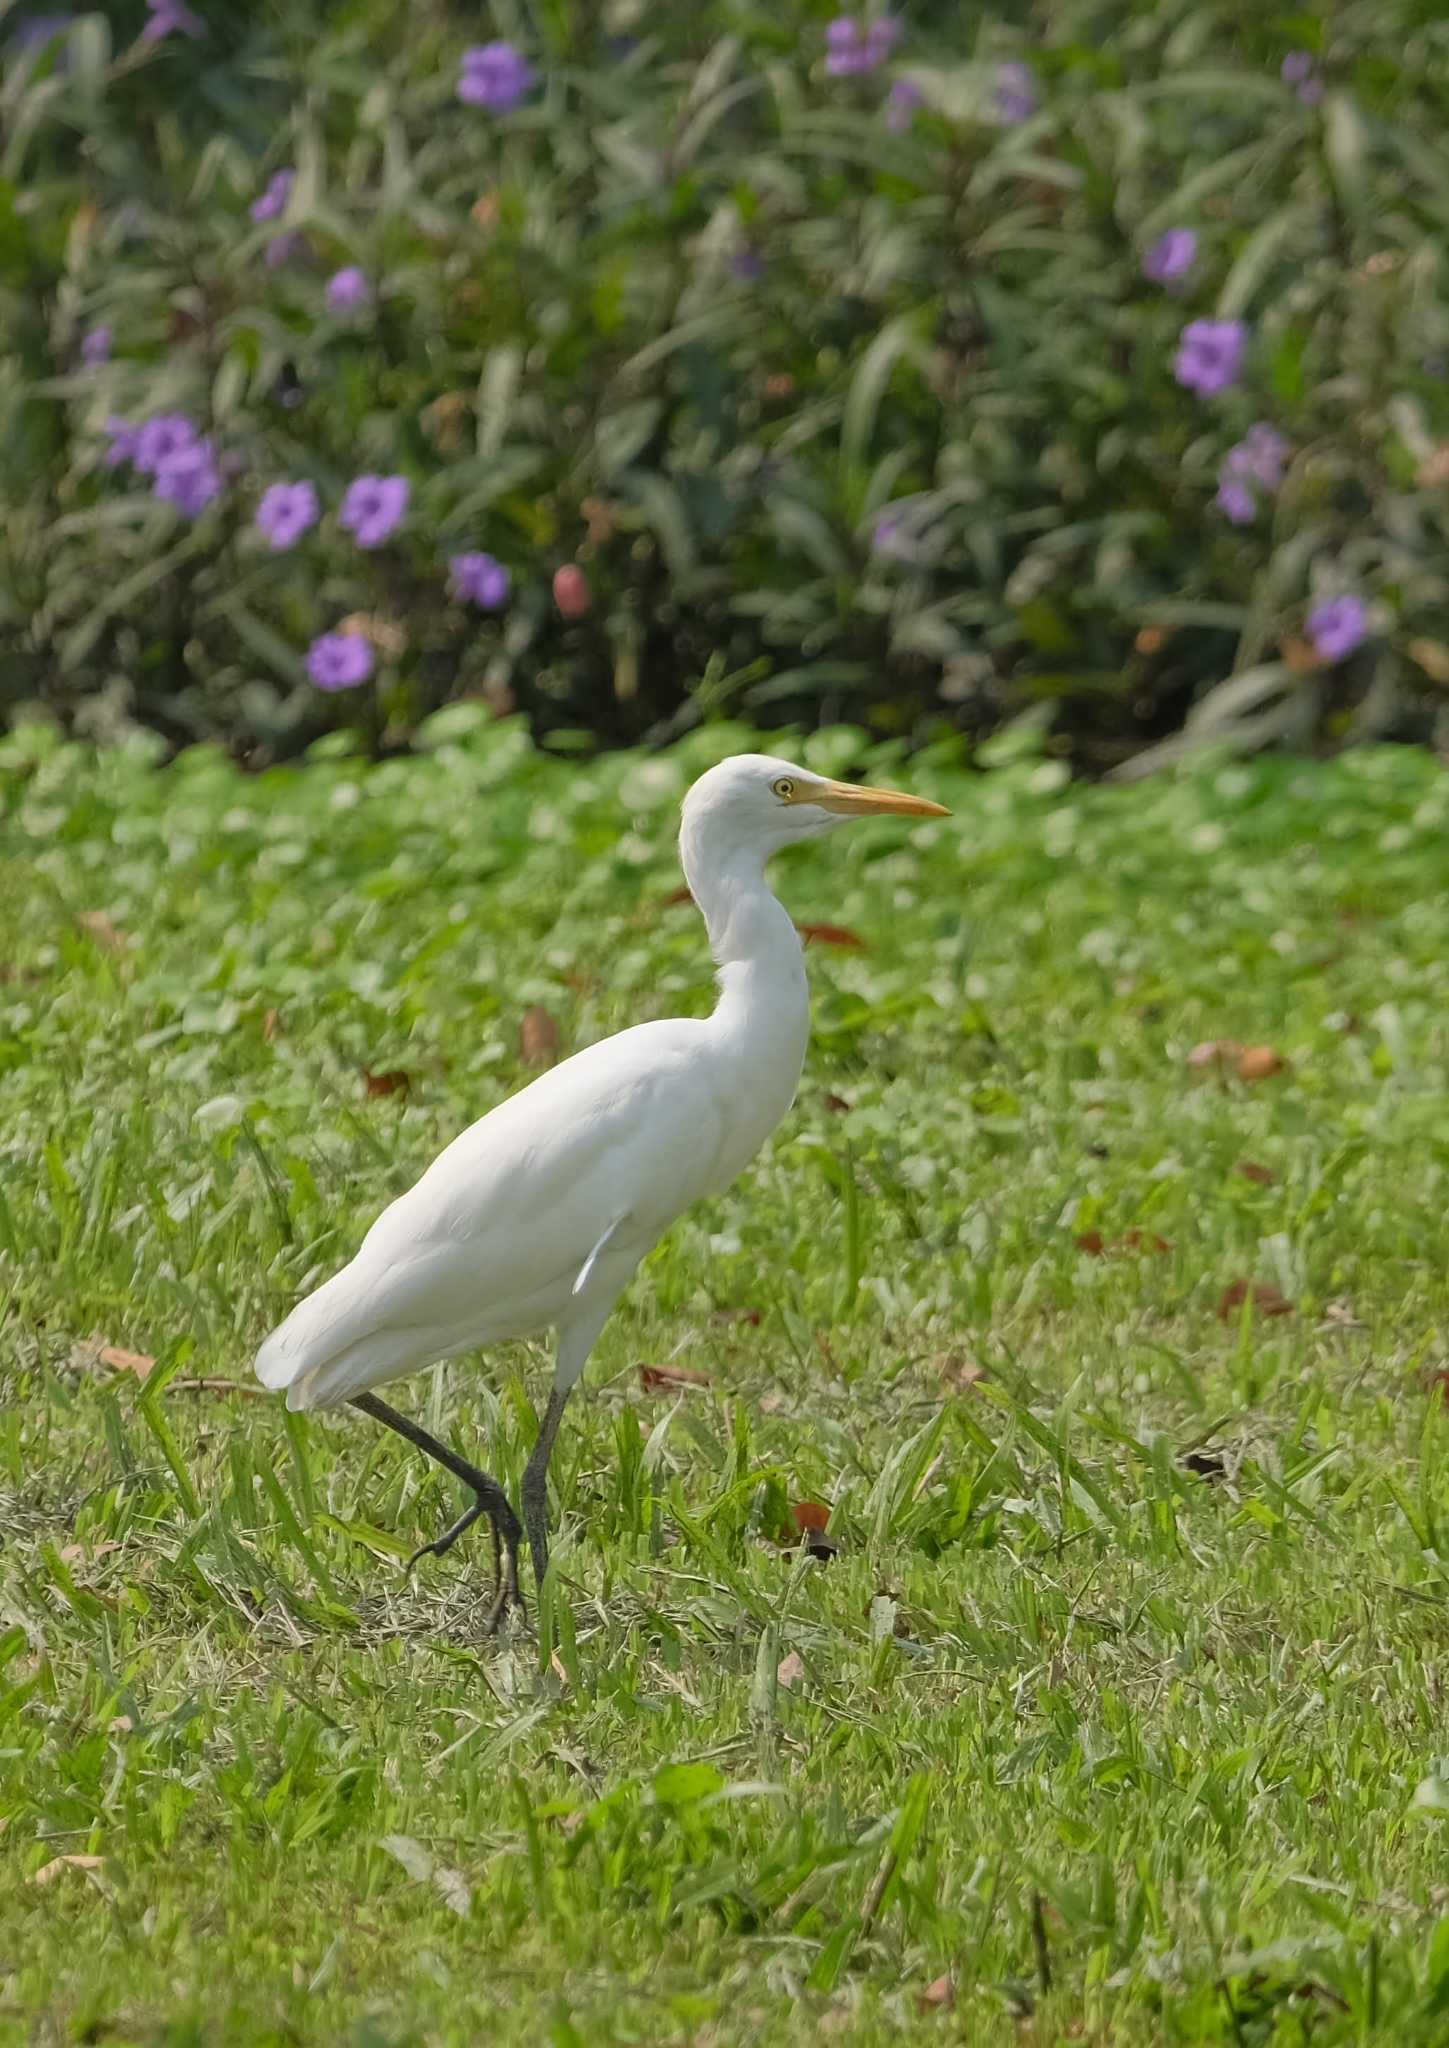 Photo of Eastern Cattle Egret at Wachirabenchathat Park(Suan Rot Fai) by BK MY